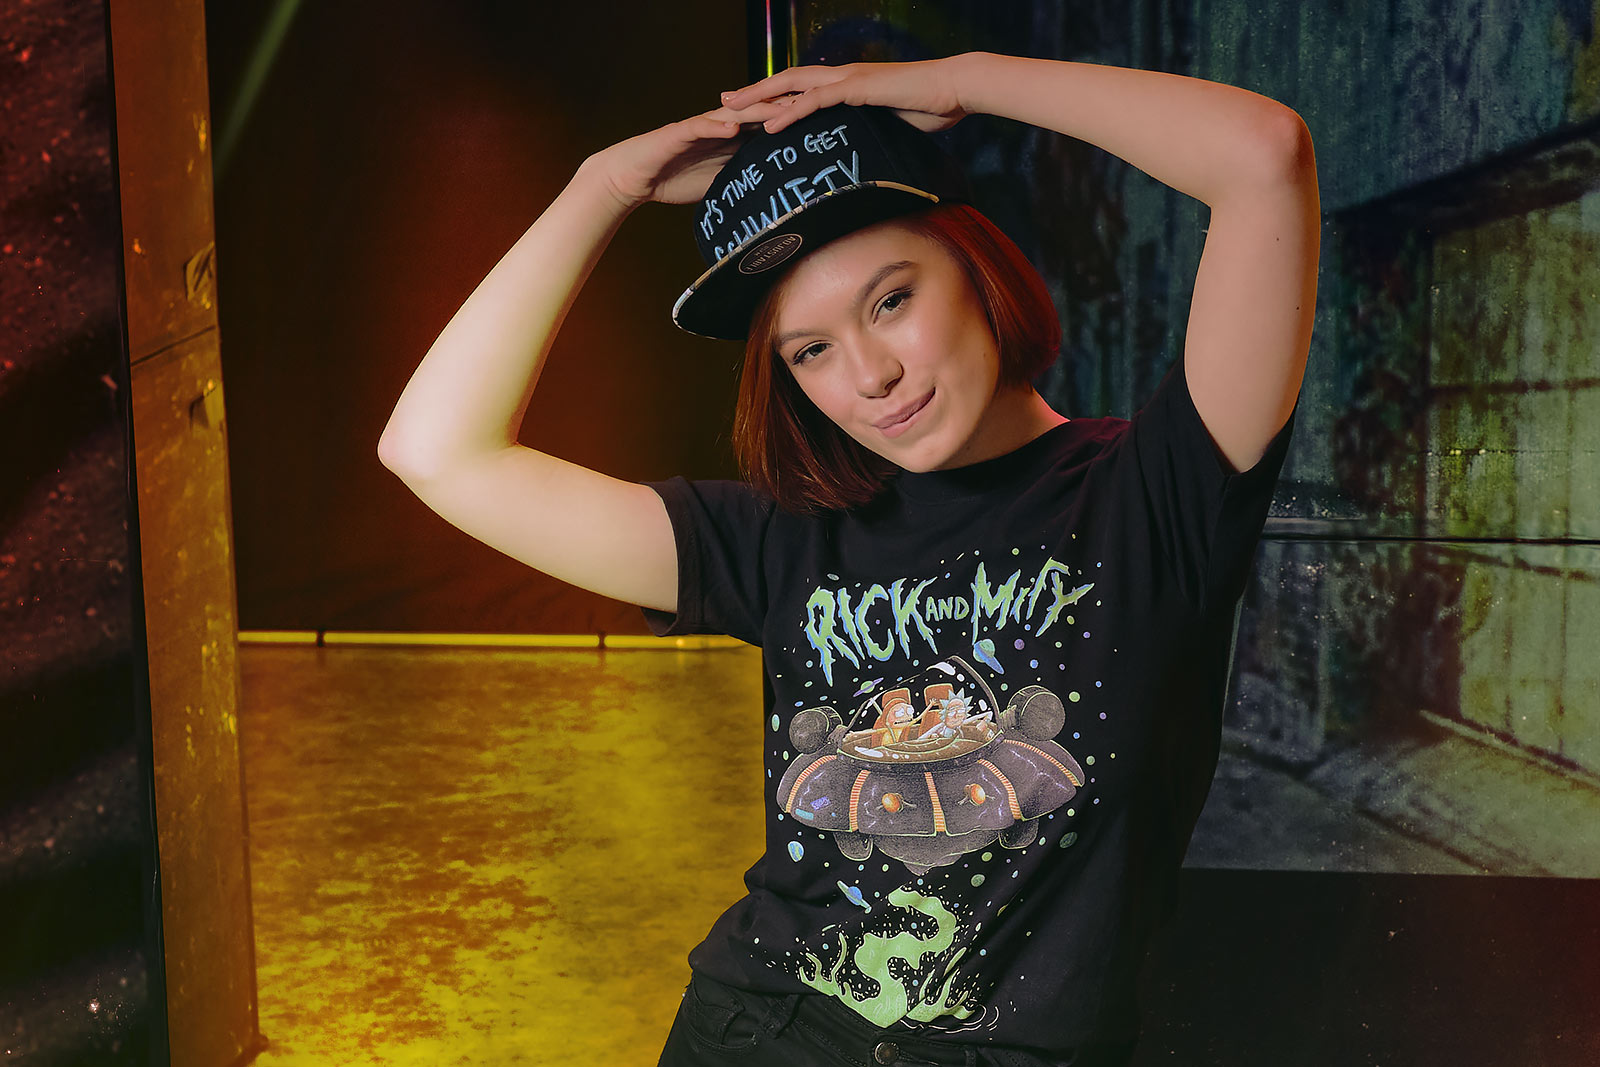 Rick et Morty - Casquette Snapback Get Schwifty